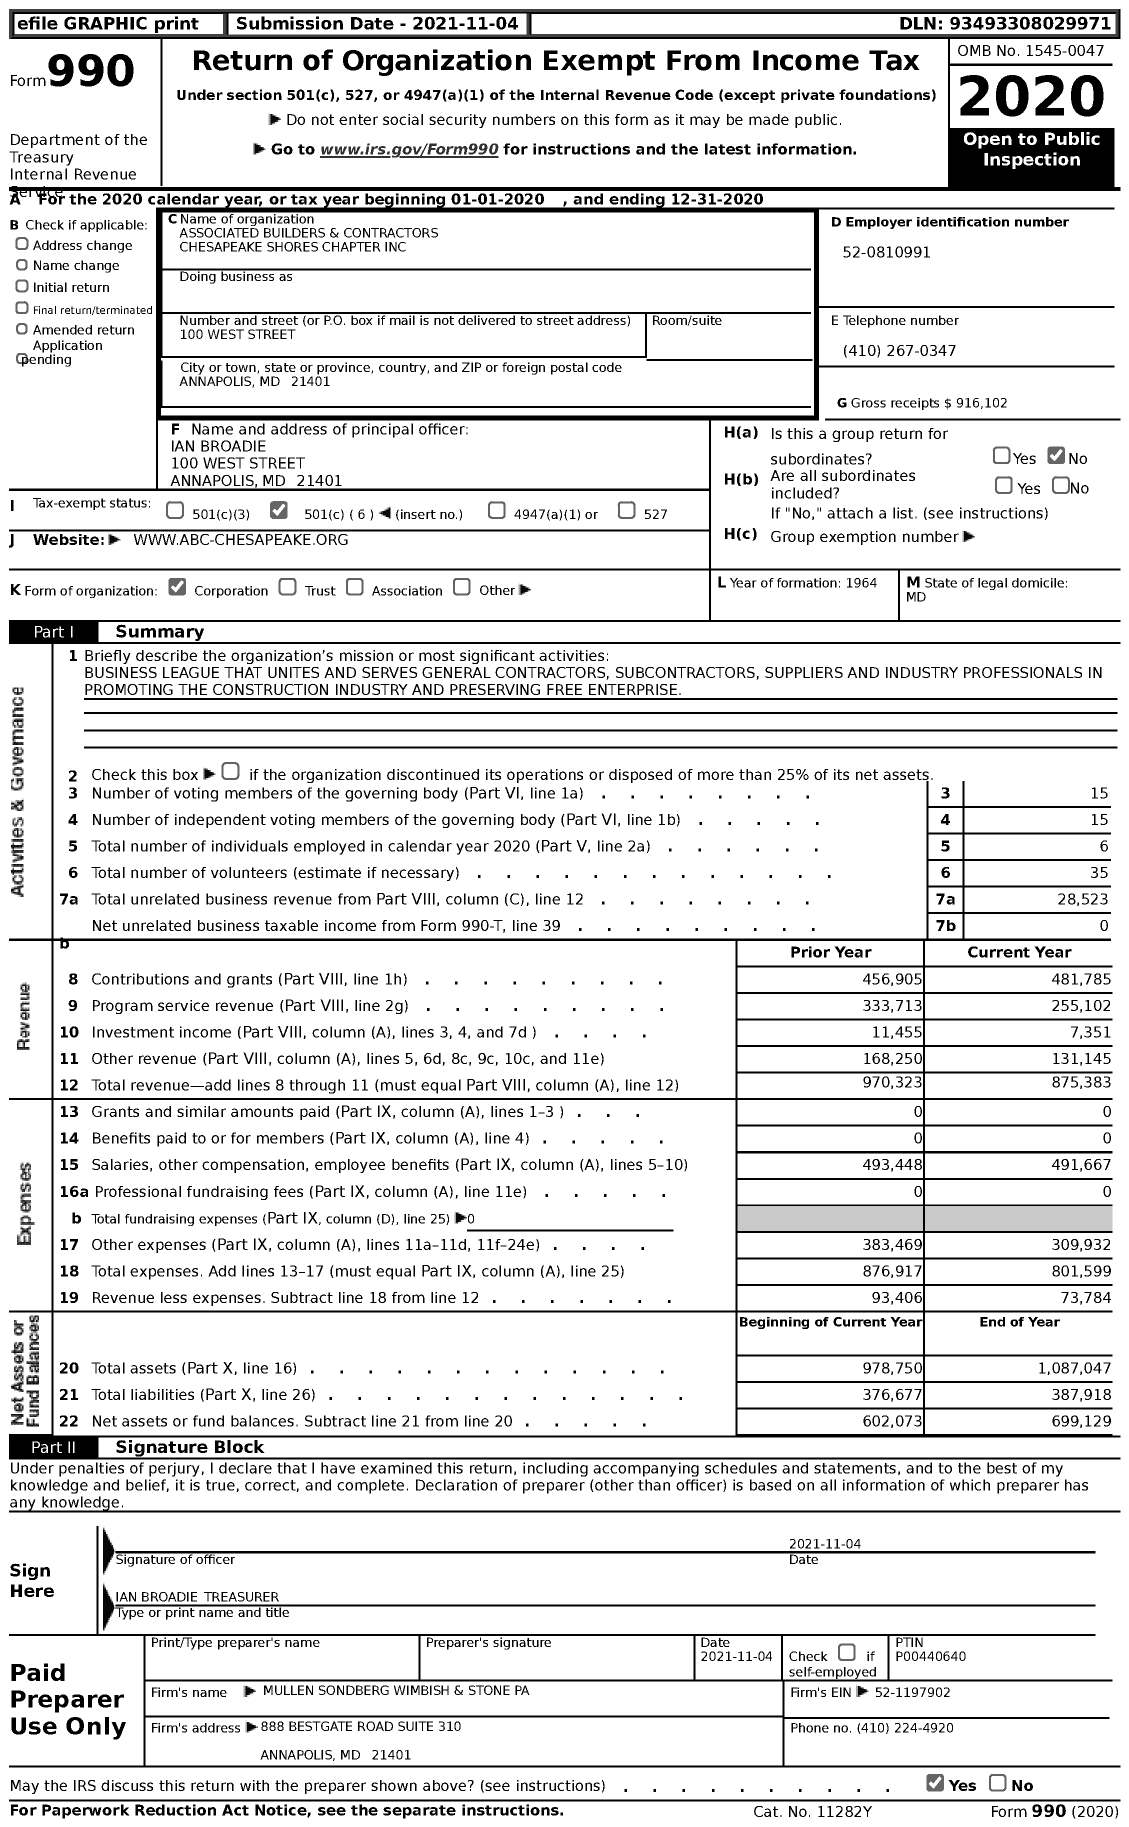 Image of first page of 2020 Form 990 for Associated Builders and Contractors - Chesapeake Shores Chapter